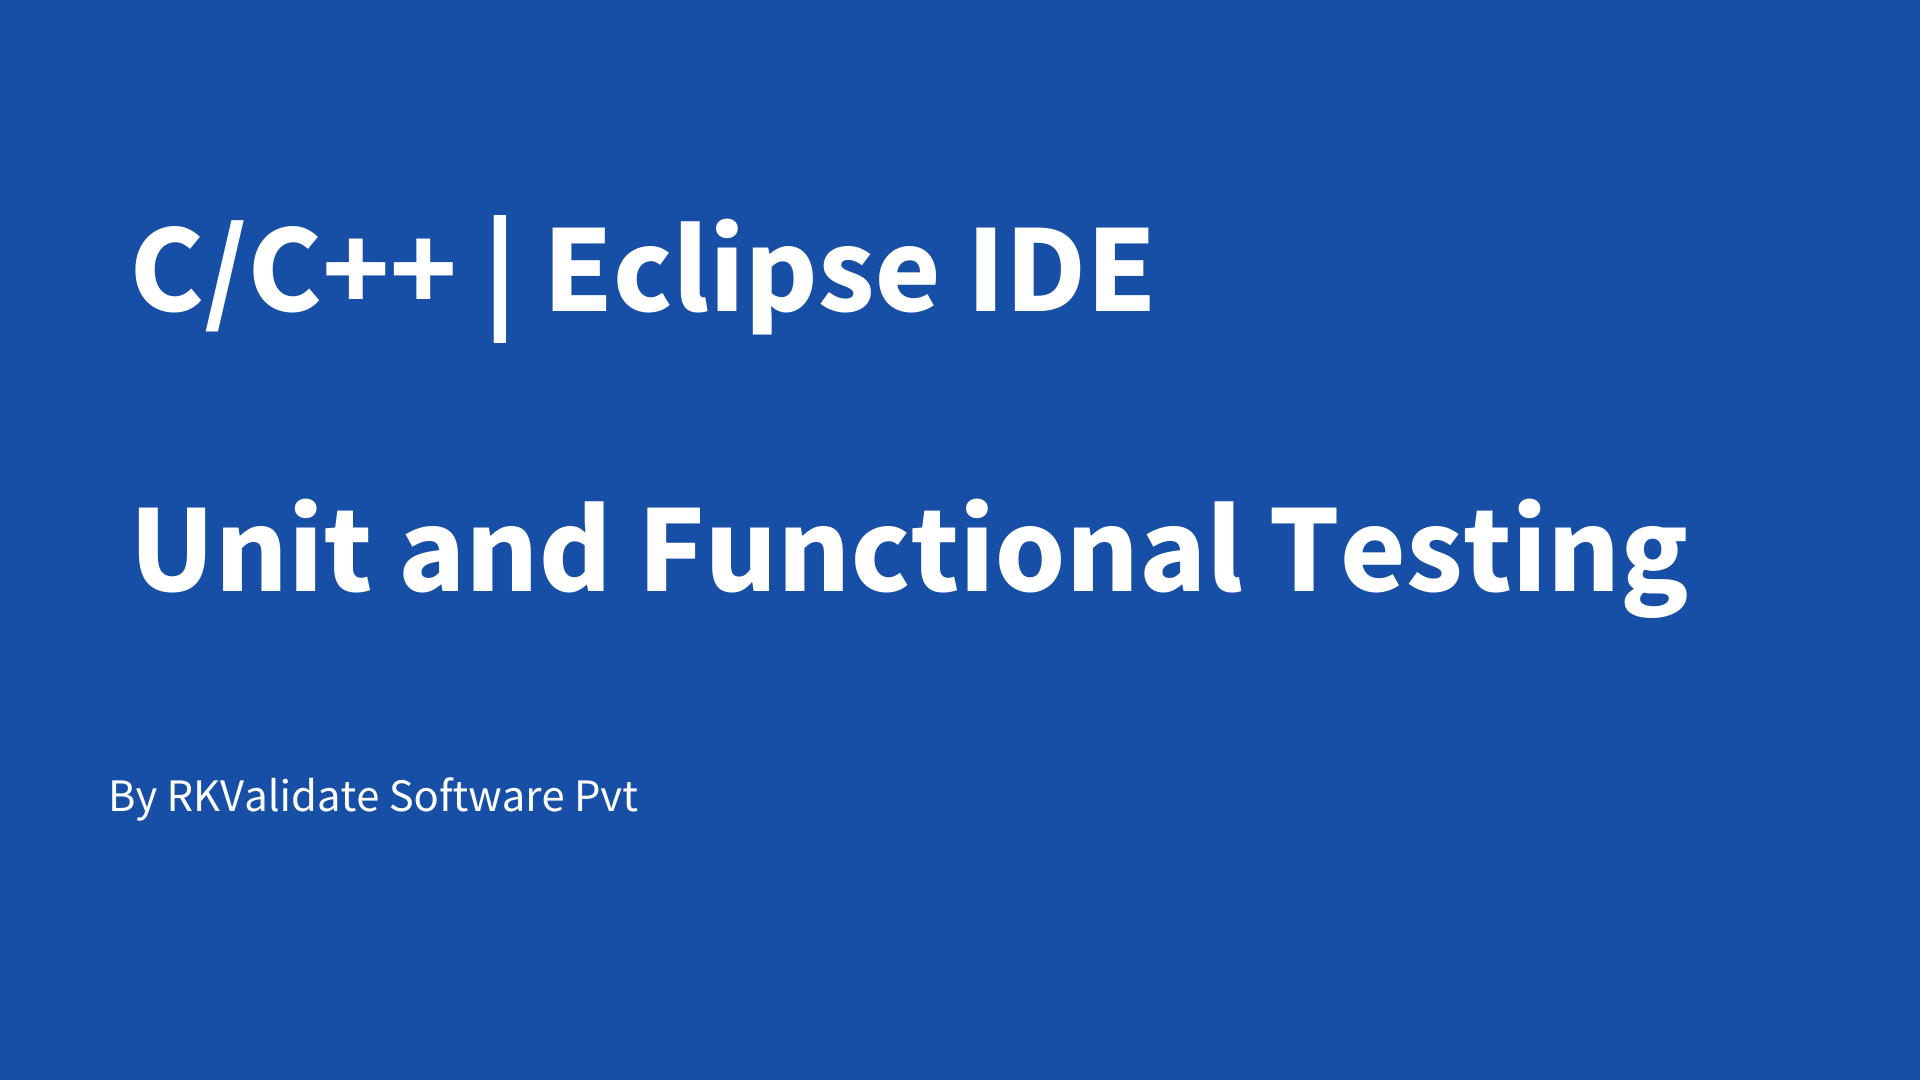 C and C++ Eclipse IDE